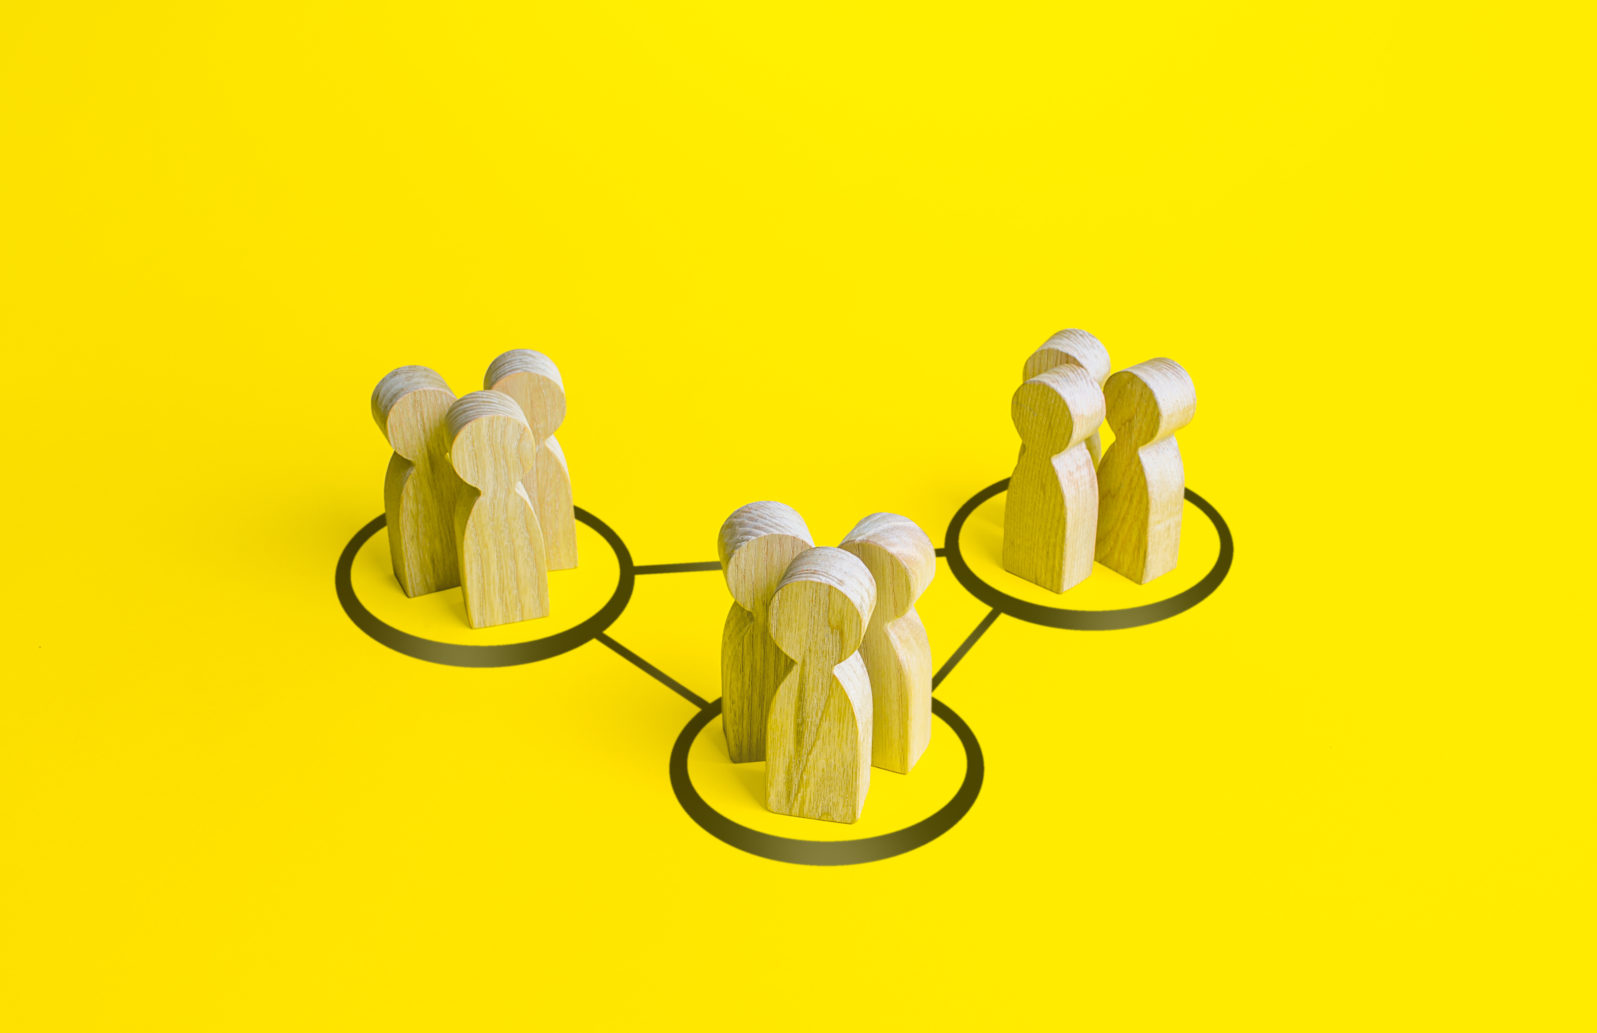 Groups of people are connected by lines. Interdependence correlation in workflow. Interacting and joining forces with other teams. Interact to complete tasks. Formation of a more complex community.